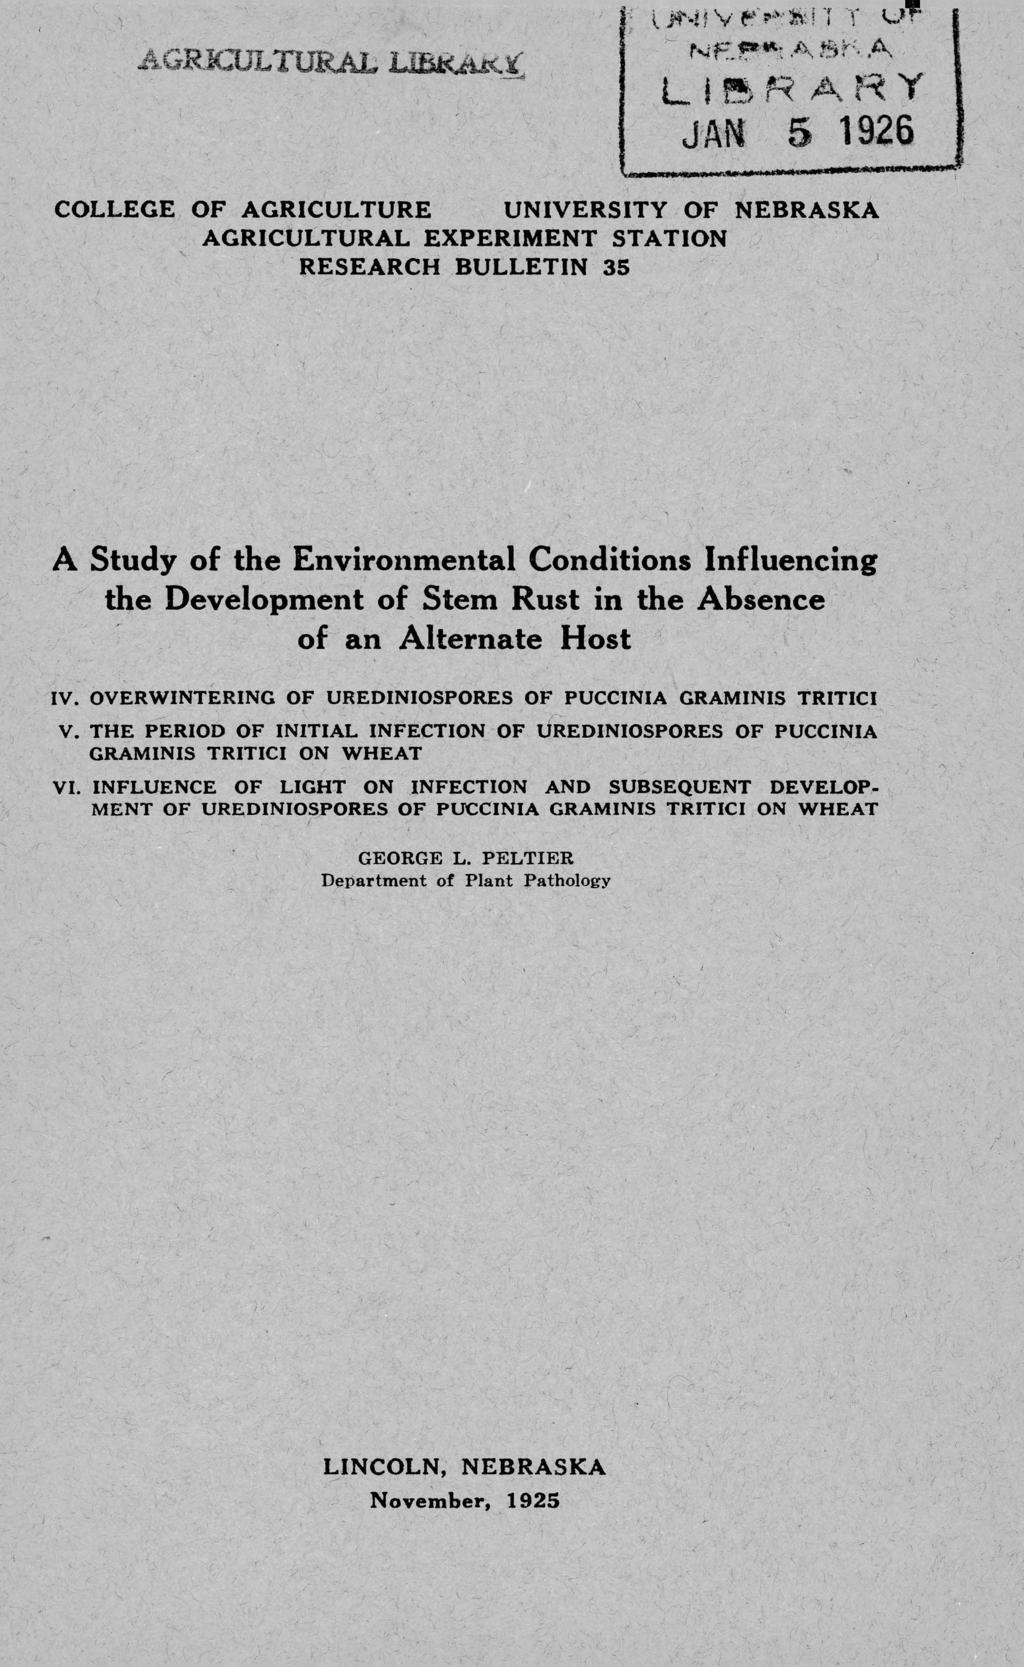 .... 1926 COLLEGE OF AGRICULTURE UNIVERSITY OF NEBRASKA AGRICULTURAL EXPERIMENT ST A TION RESEARCH BULLETIN 35 A Study of the Environmental Conditions Influencing the Development of Stem Rust in the